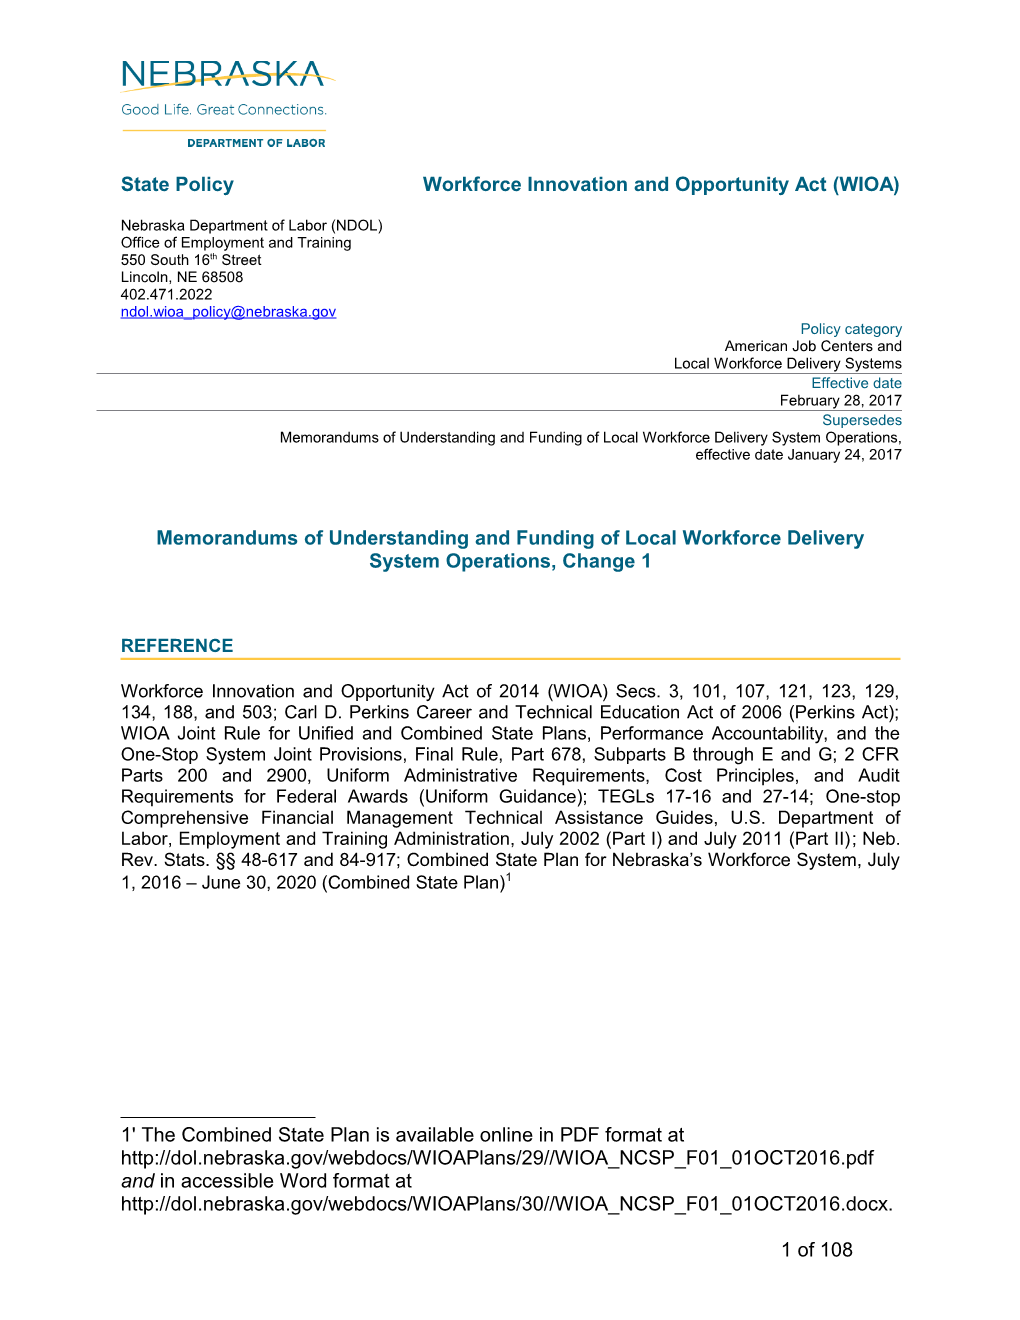 Memorandums of Understanding and Funding of Local Workforce Delivery System Operations